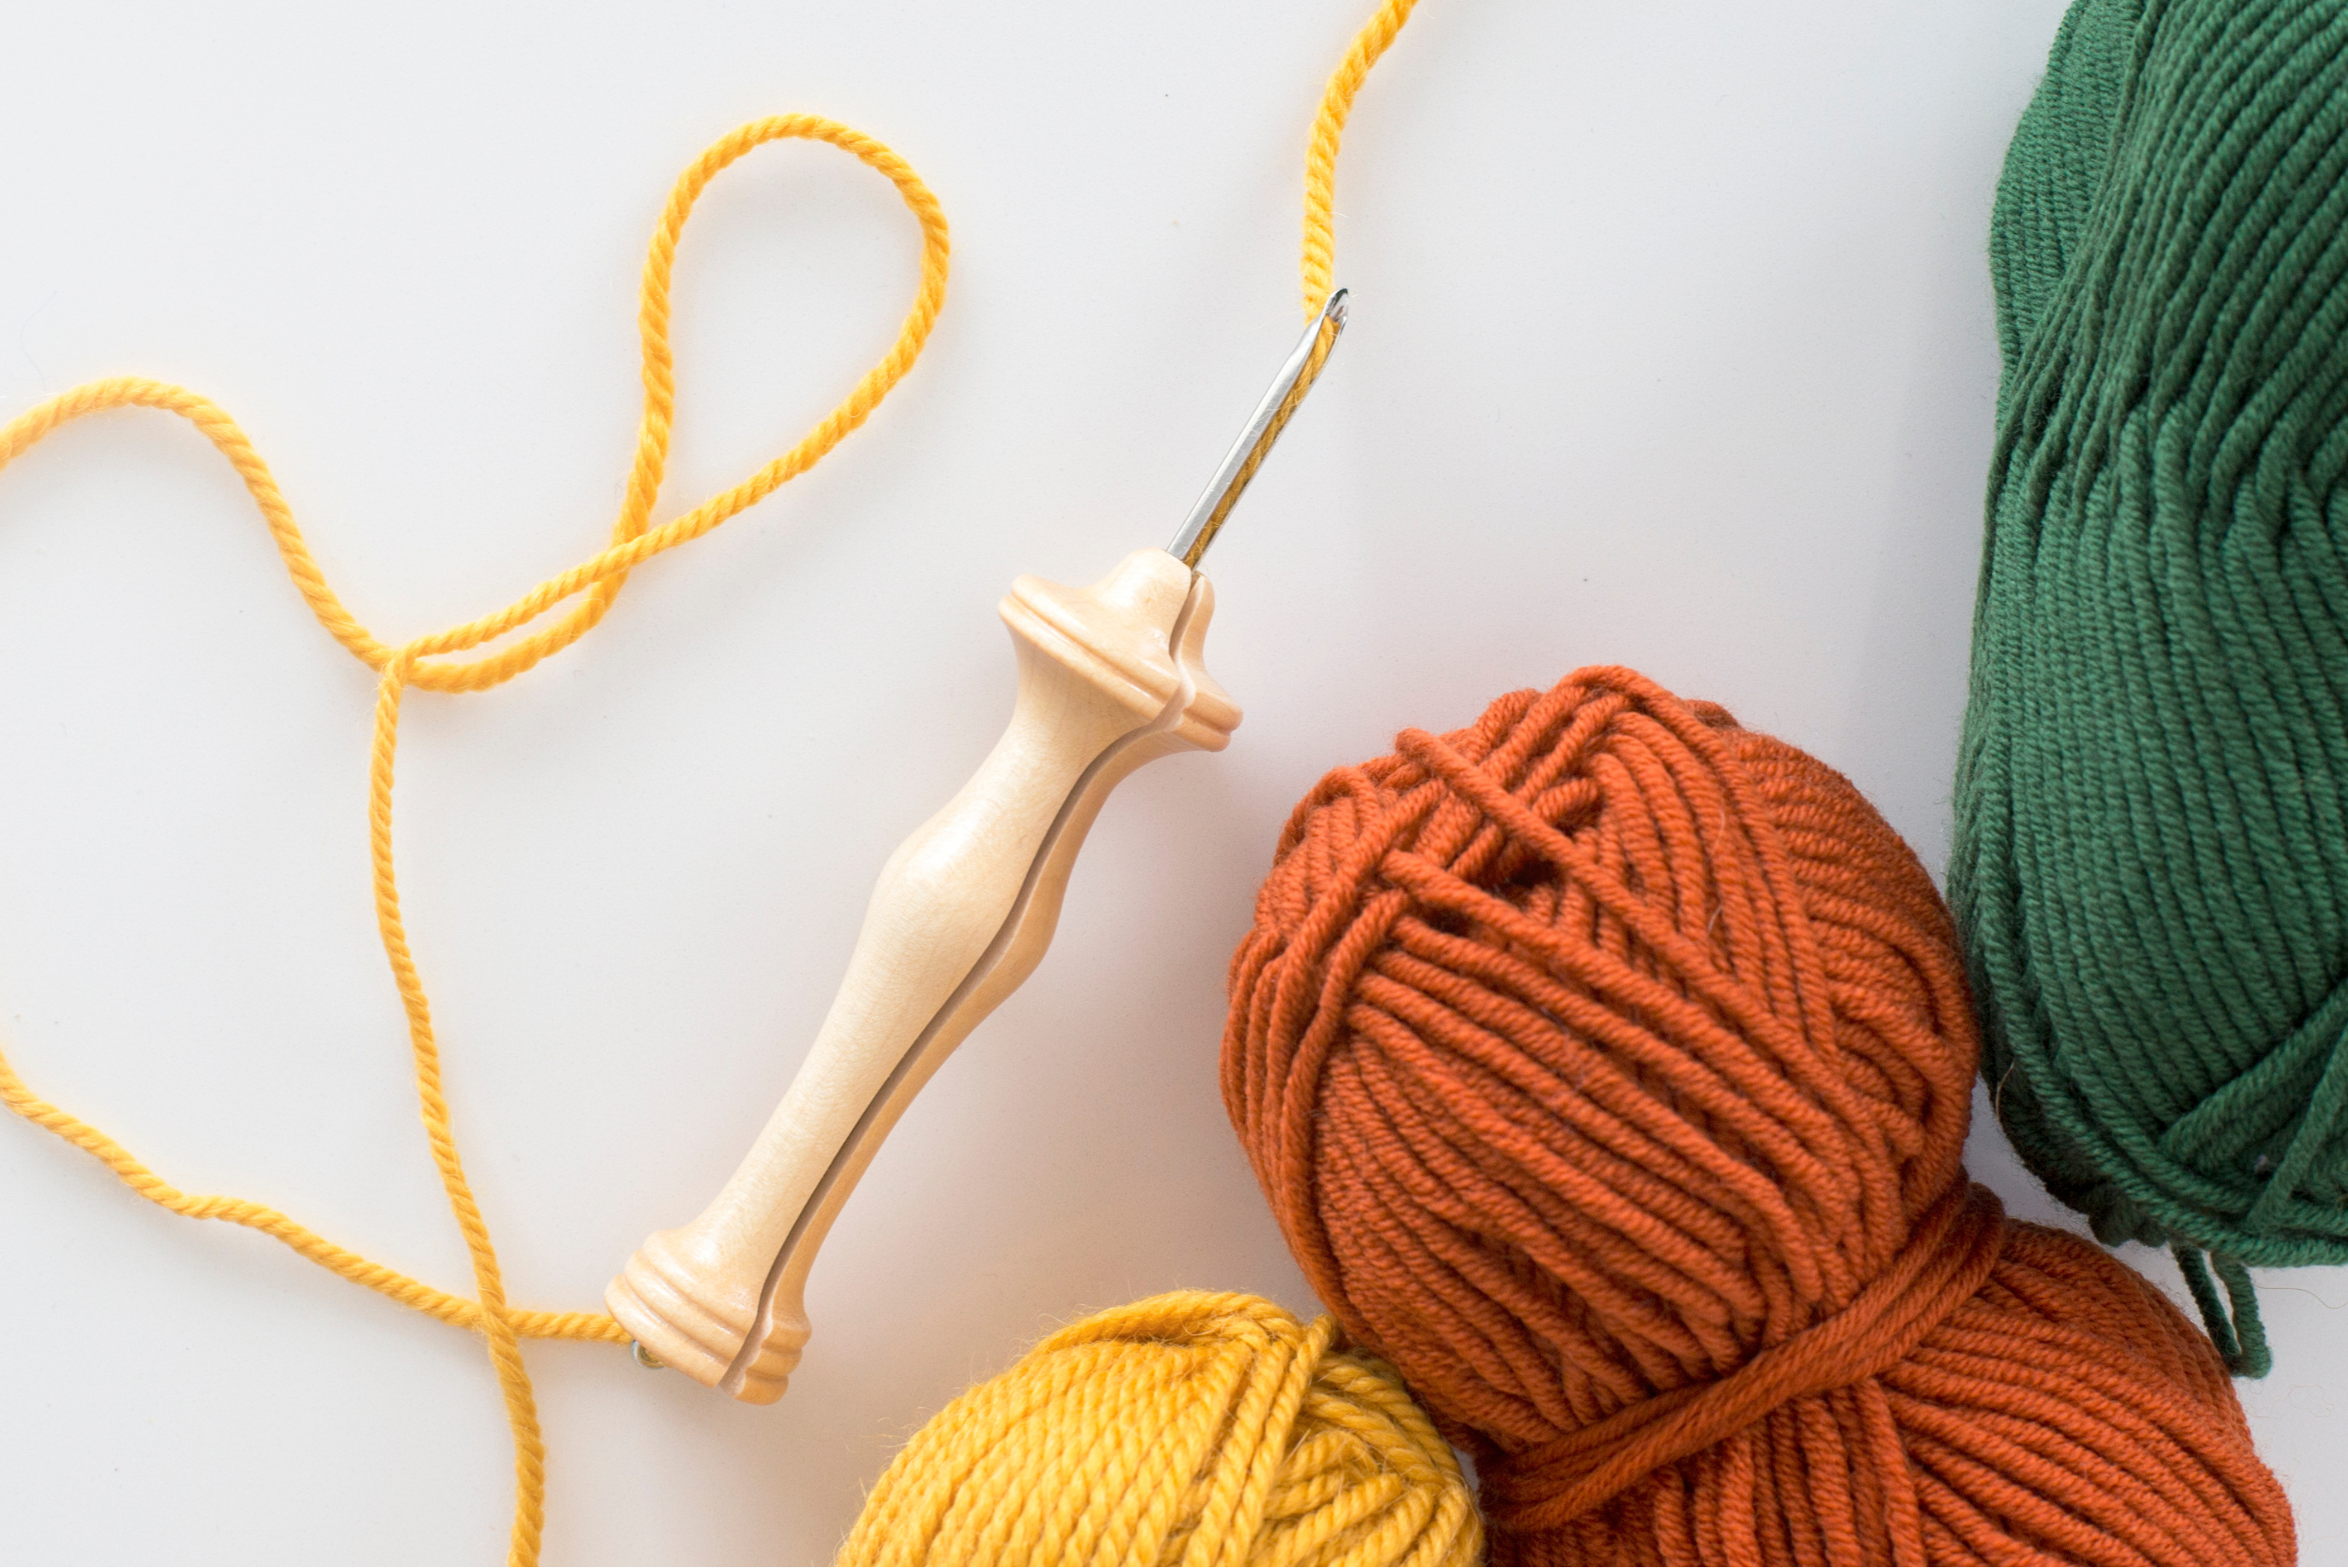 image of a punch needle tool with yellow yarn threaded through it, and skeins of orange and green yarn